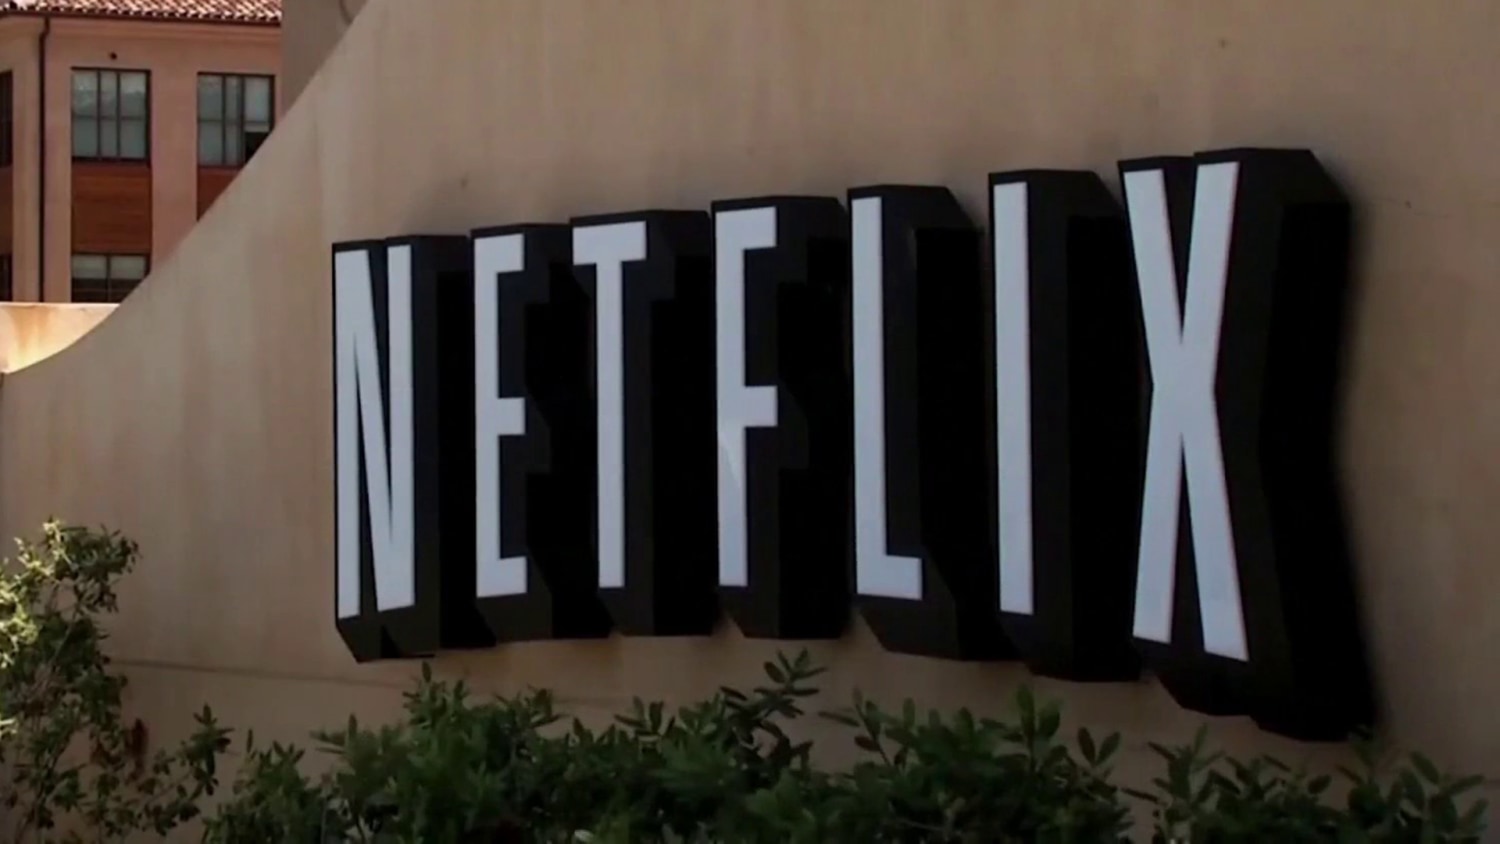 Netflix reported its first subscriber loss in a decade